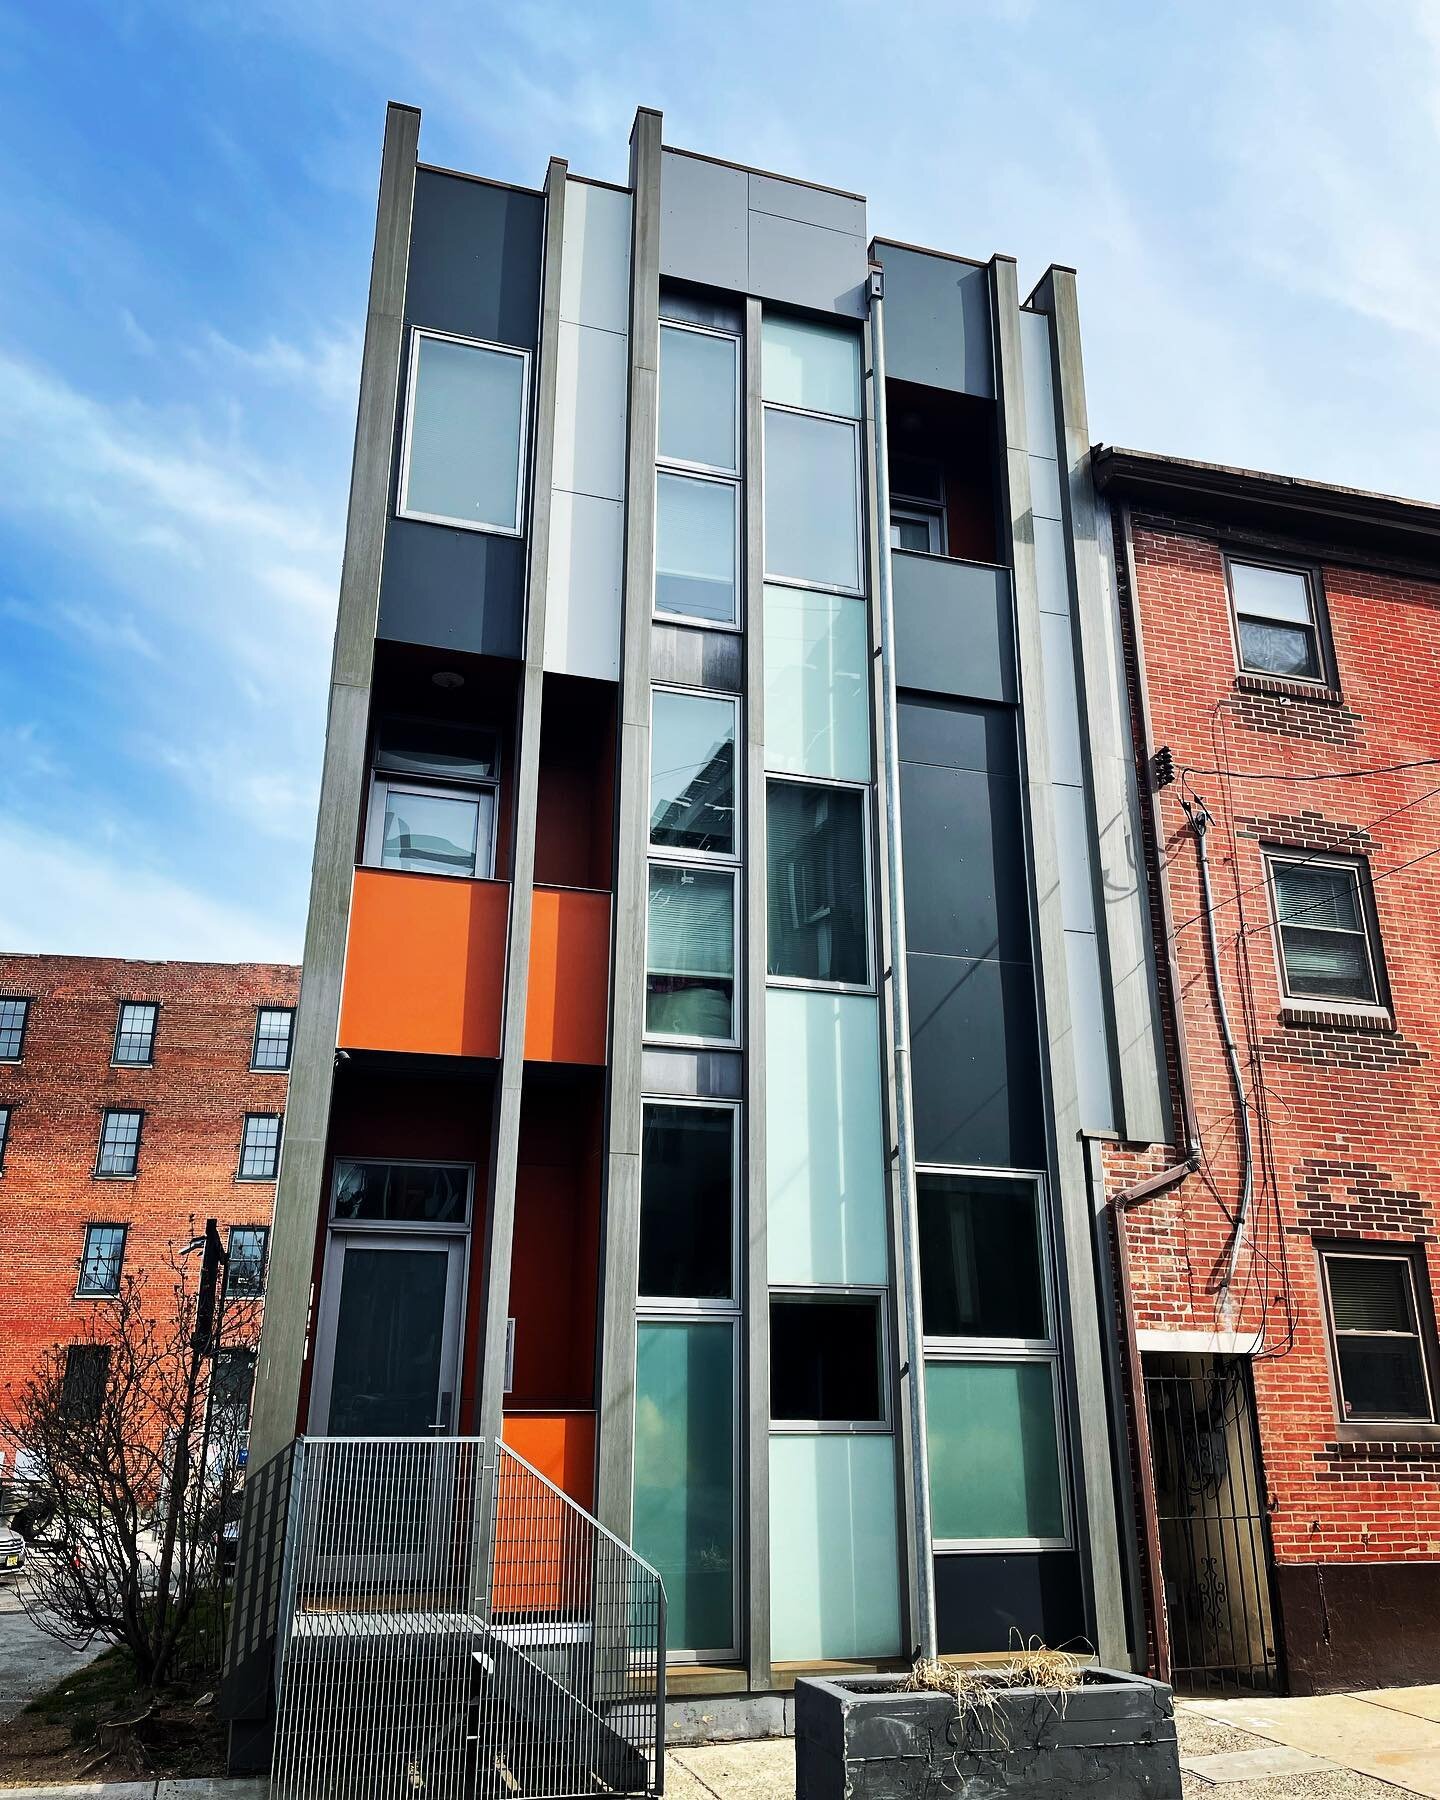 Last week we got a personalized tour of the @onionflats developments of in Philadelphia. These are passive house Multifamily developments and Onion flats were one of the first MF builders to be accredited by @passivehouseinstituteus. I heard about th